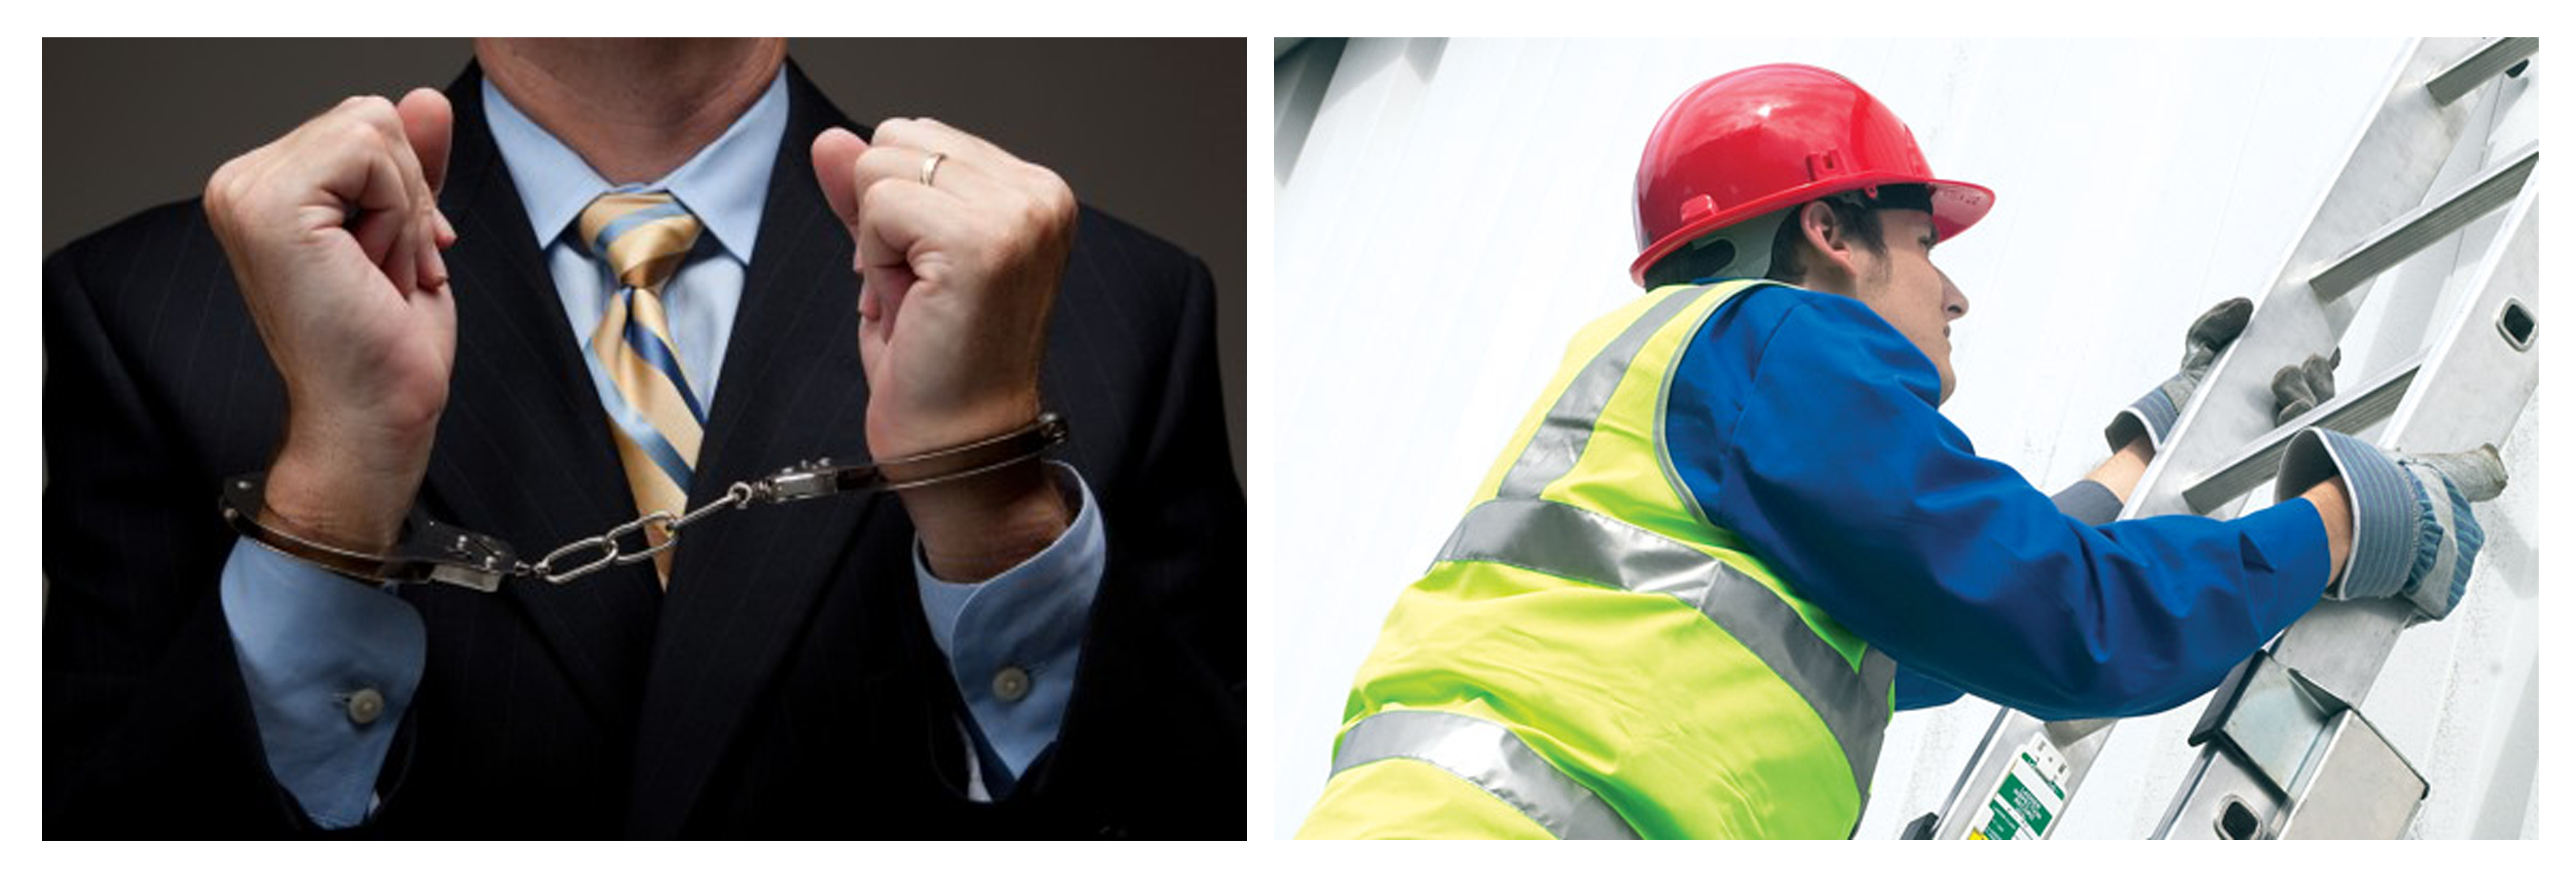 The New Health & Safety and Corporate Manslaughter Guidelines